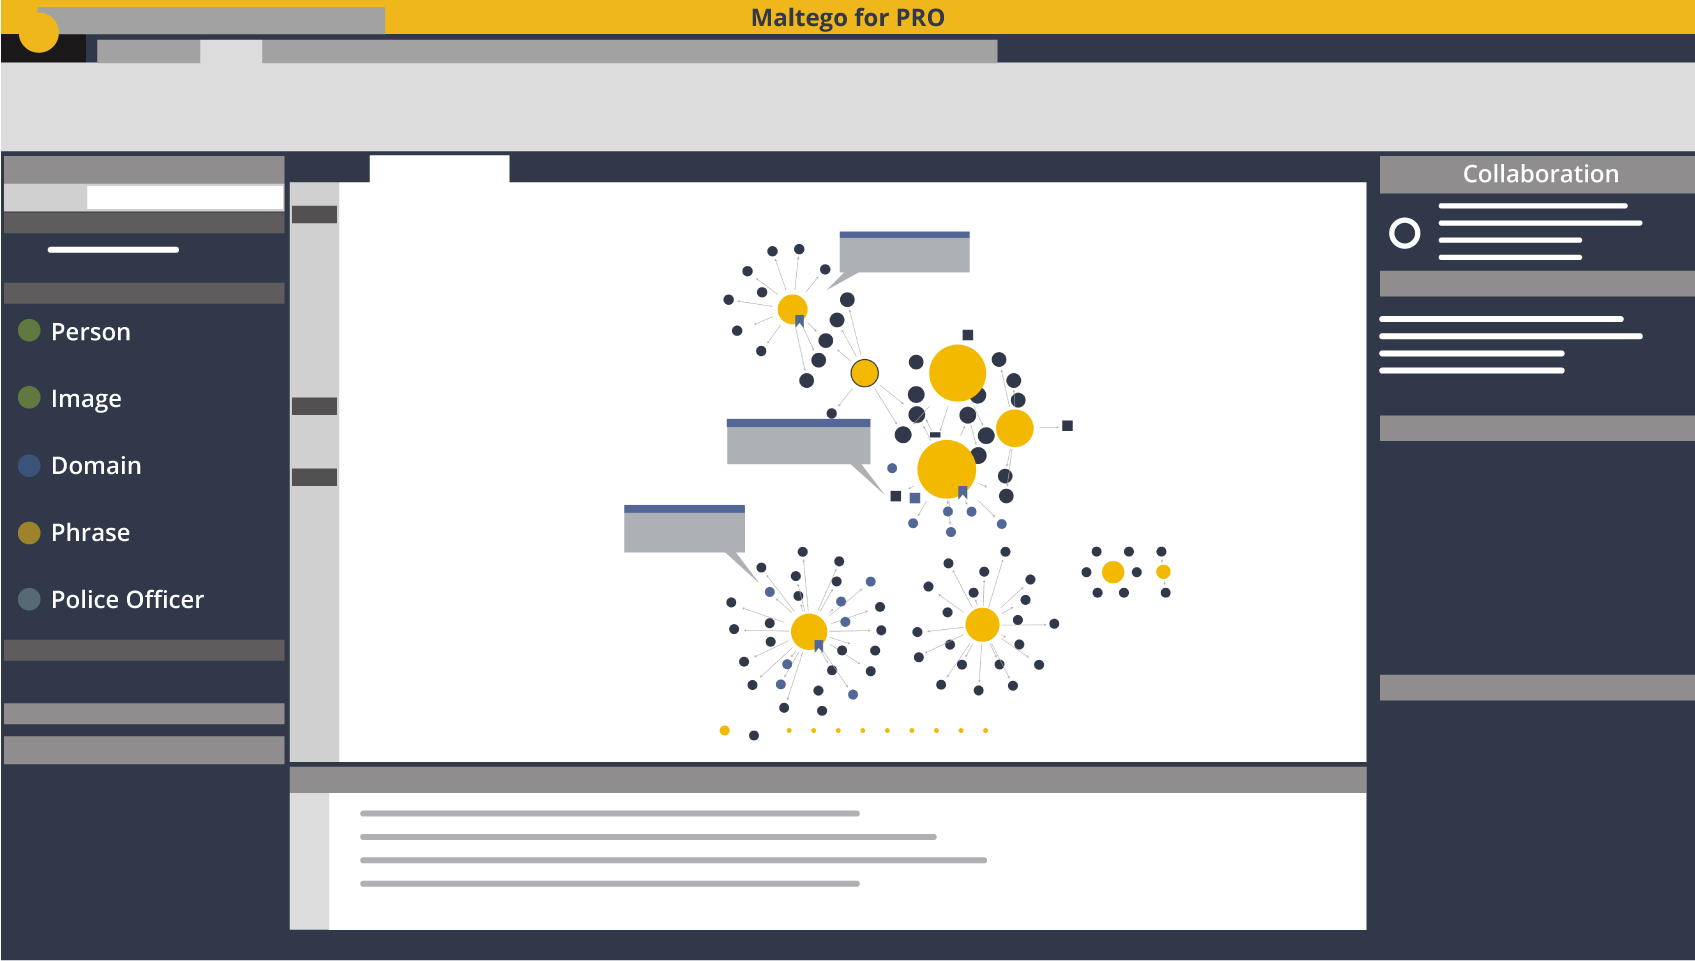 Maltego provides a visualization of your search results